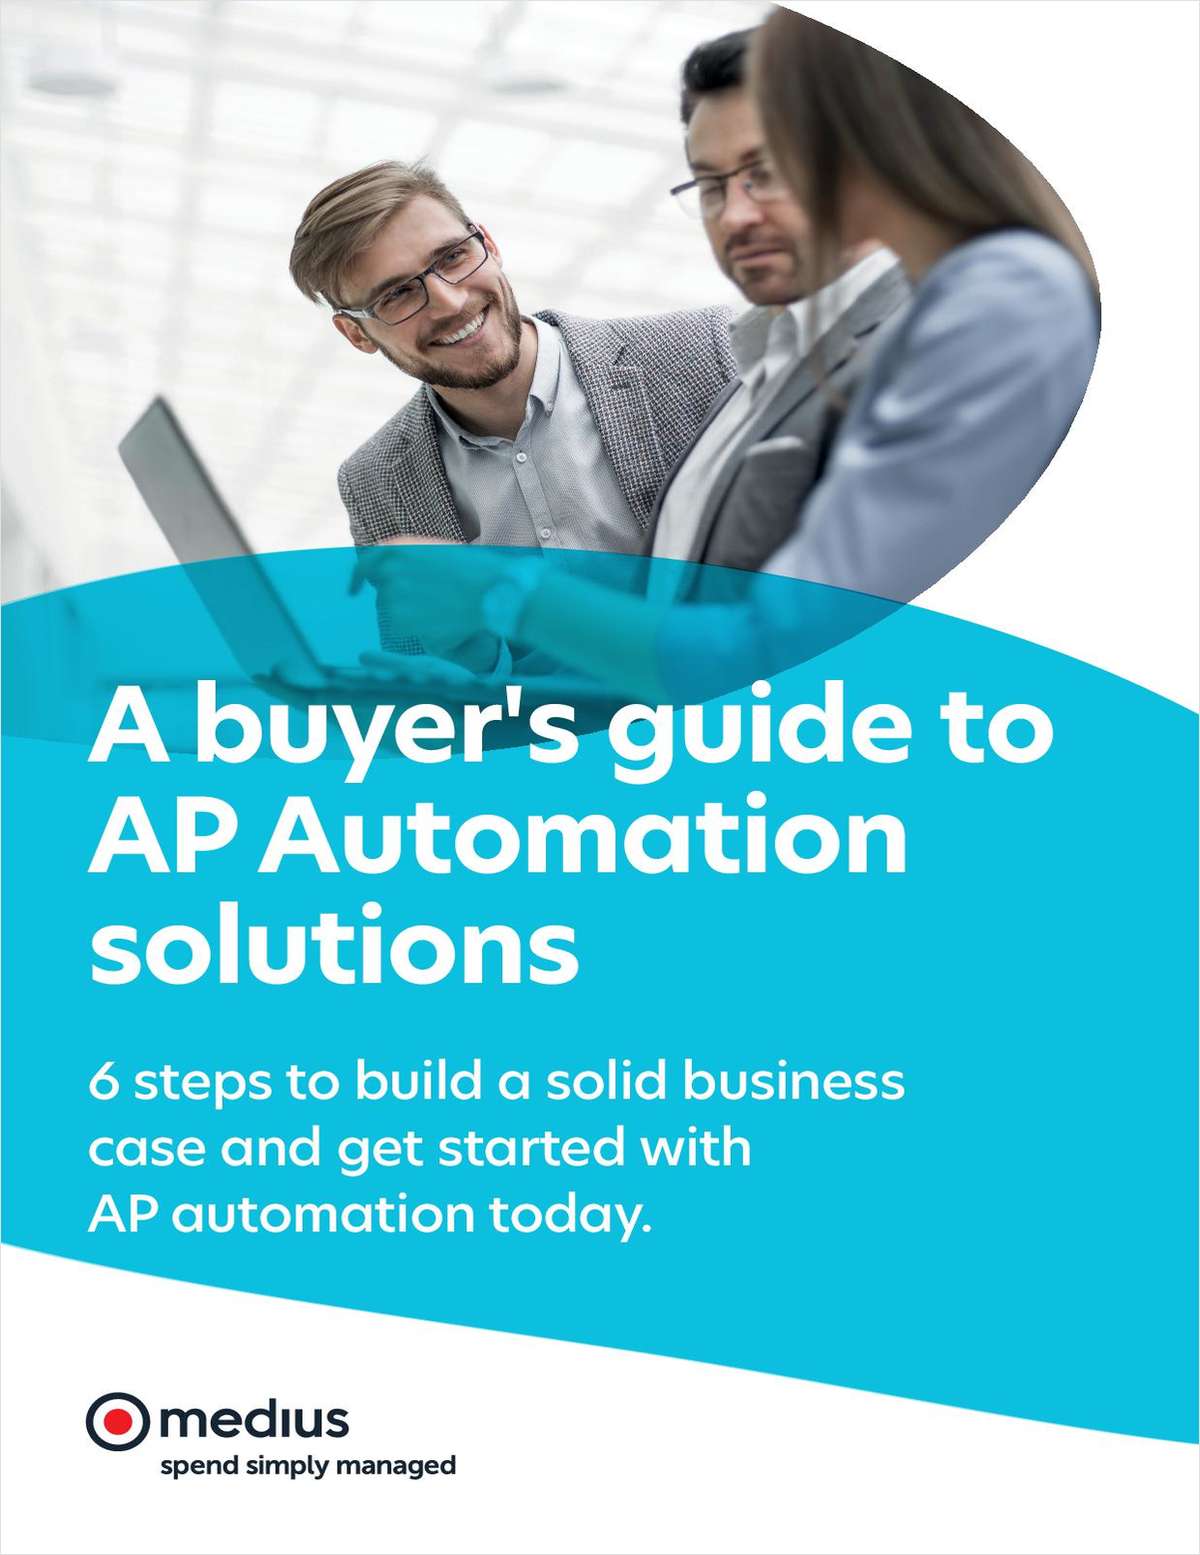 6 Steps to building an AP automation business case